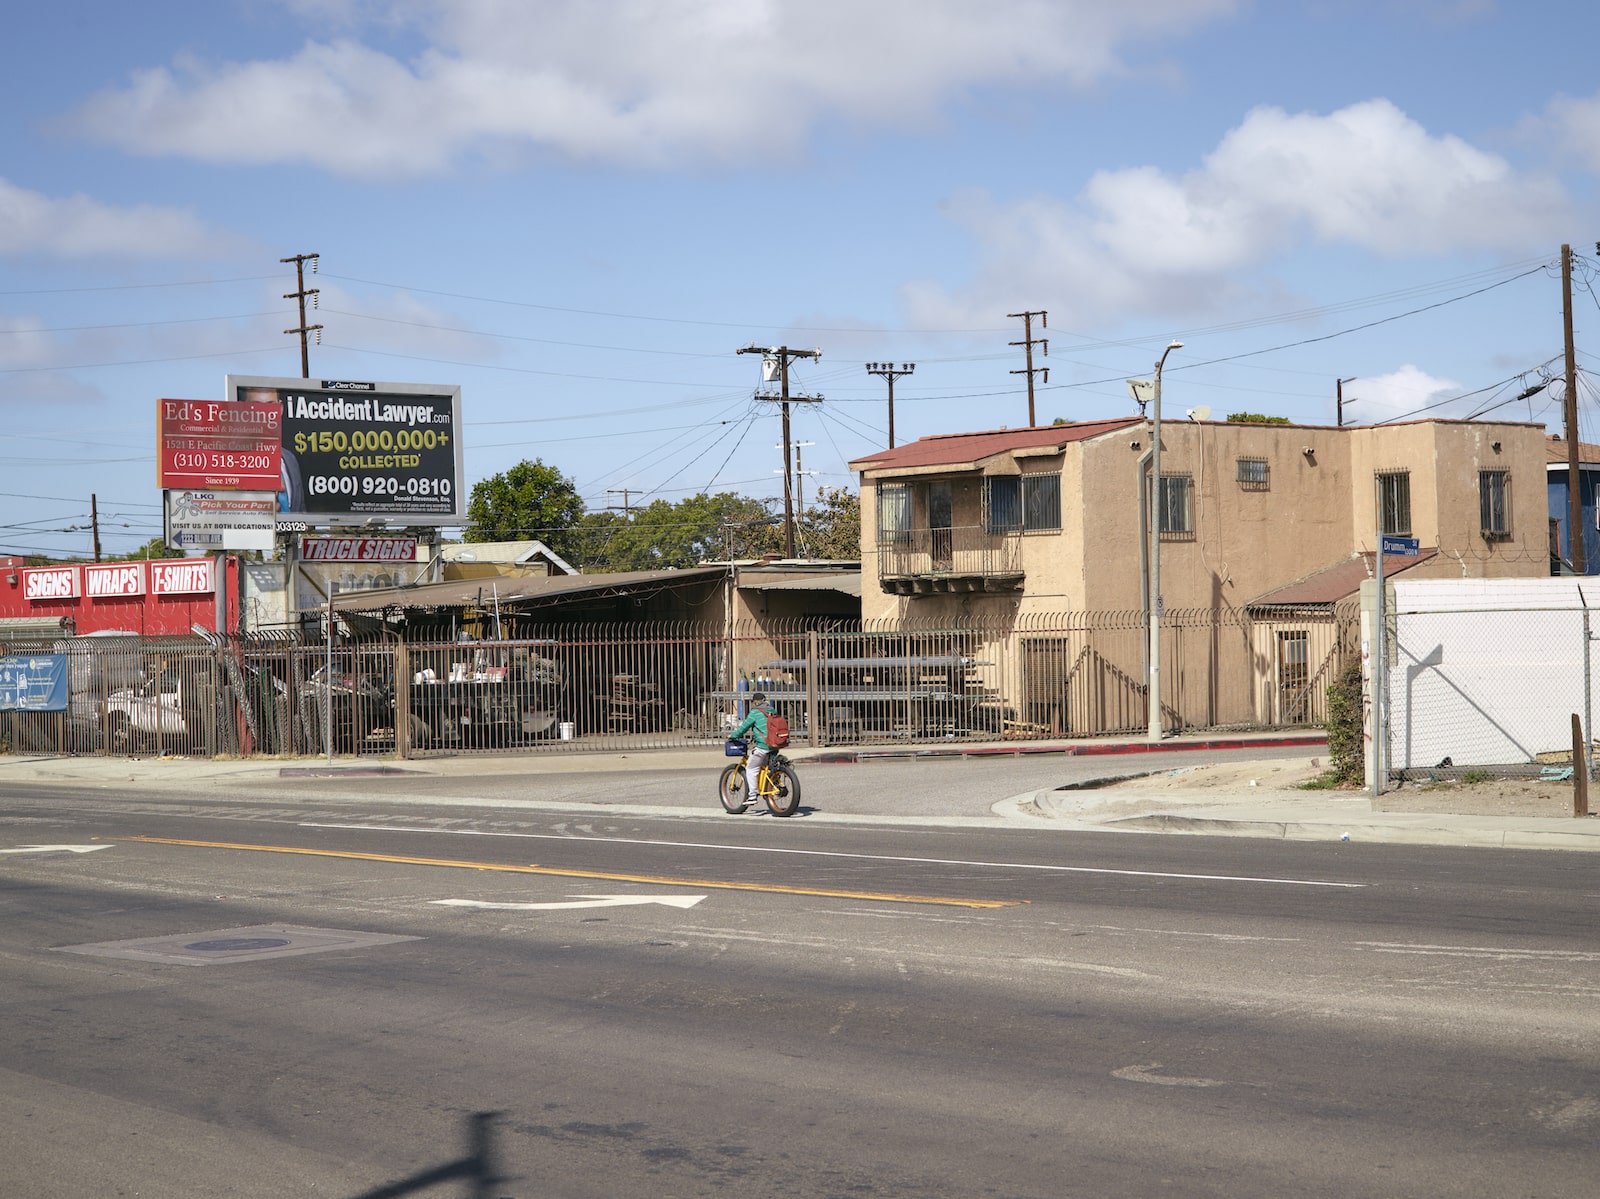 a man on a bicycle rides past a billboard on a residential street